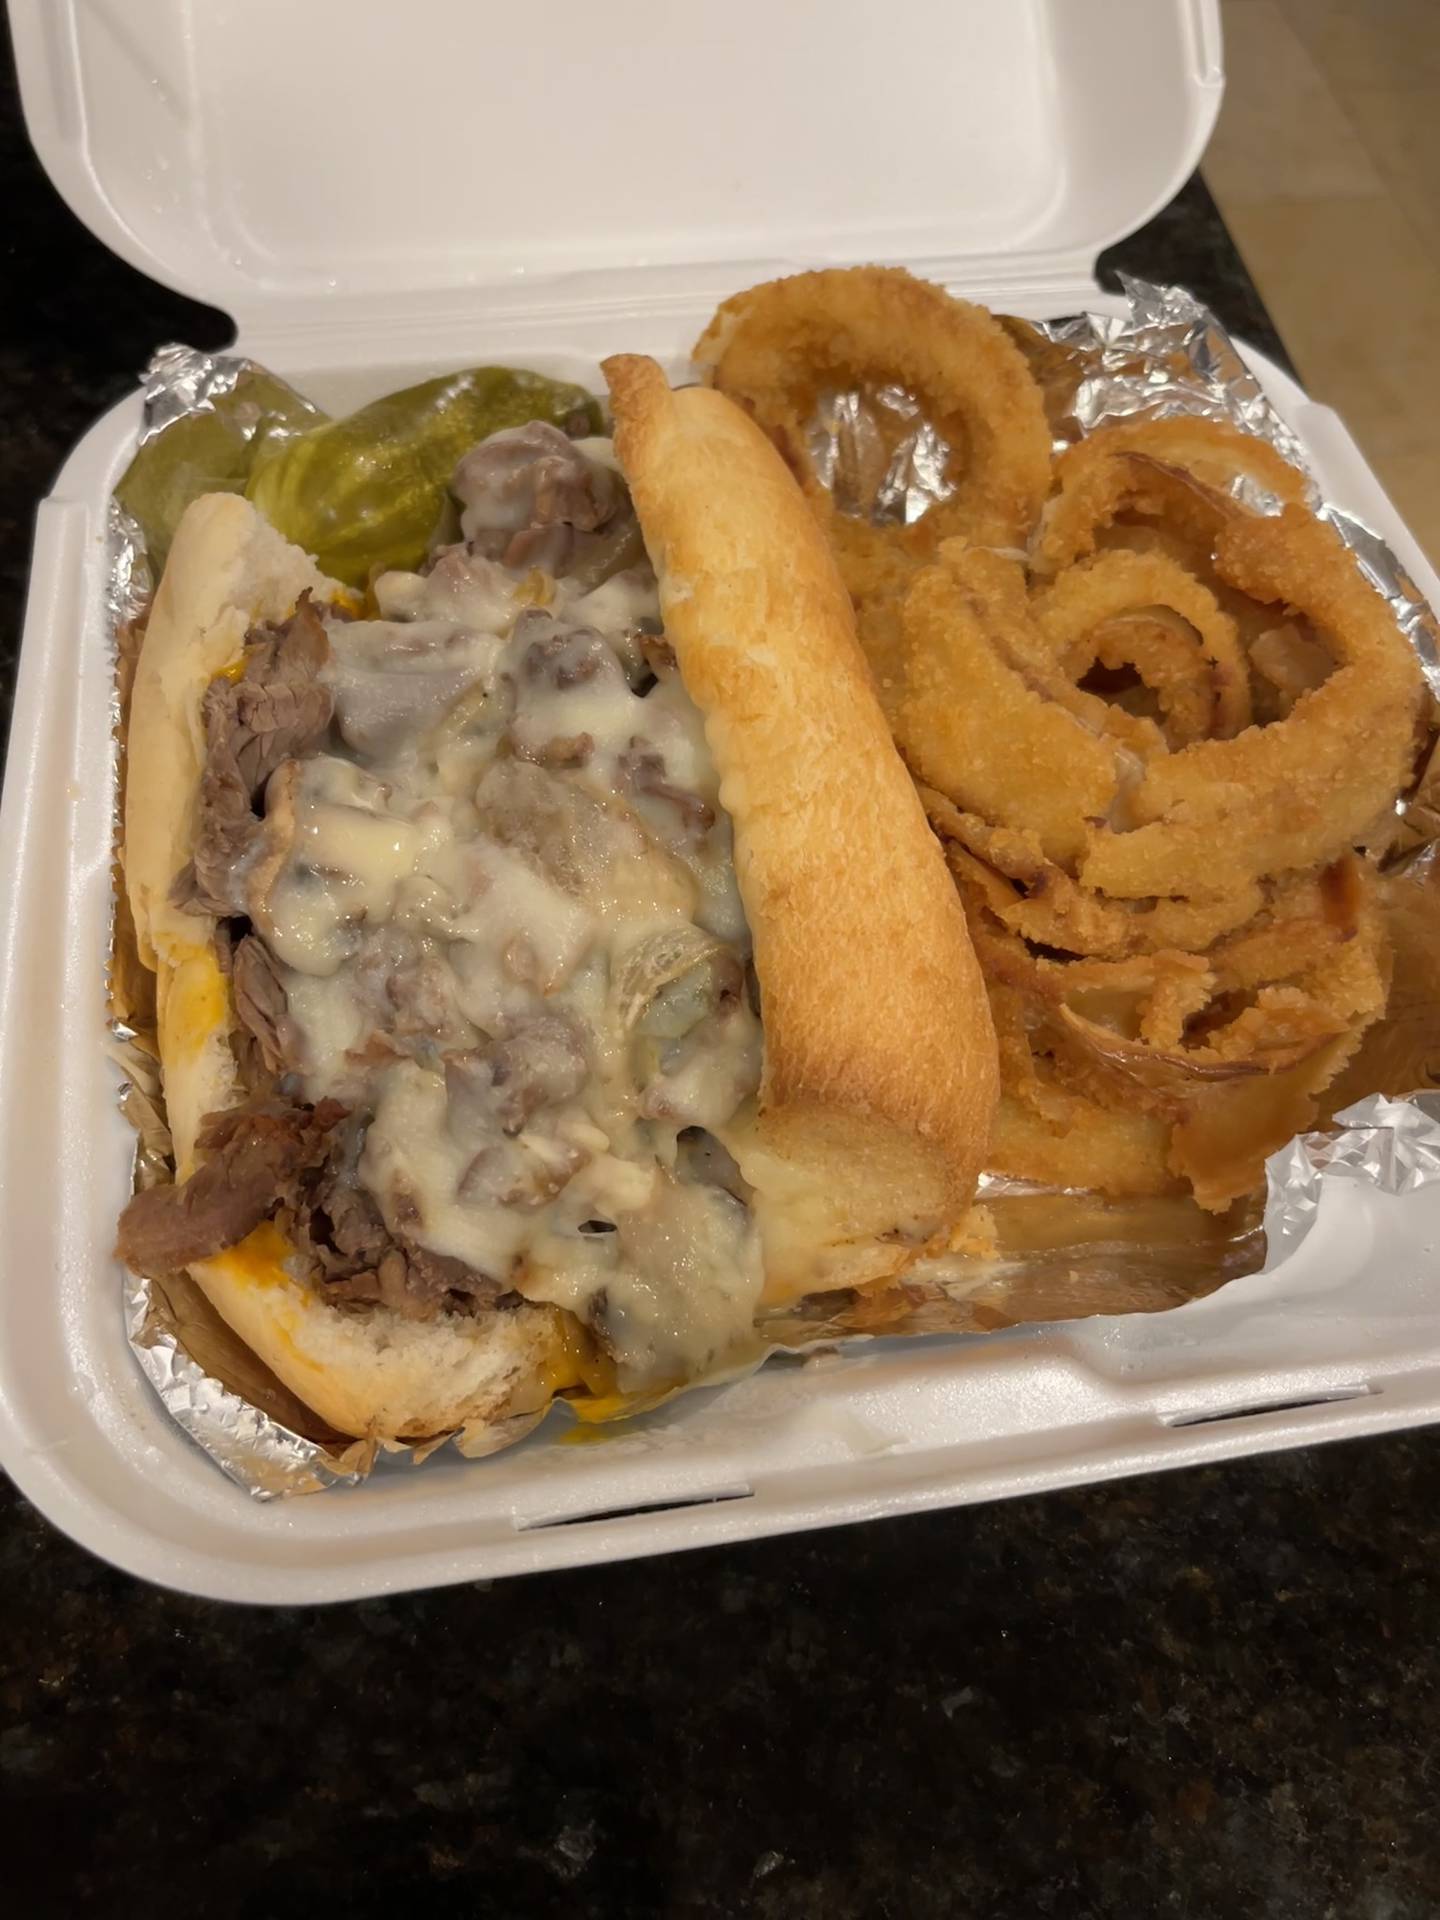 The Philly Steak at Offsides Sports Bar and Grill in Woodstock has one problem: It's a very filling portion. The cheese, peppers and meat could make it hard for even the biggest cheesesteak fan to finish. Offsides is a great place to bring friends, as their menu offers a wide variety and has something for everyone.